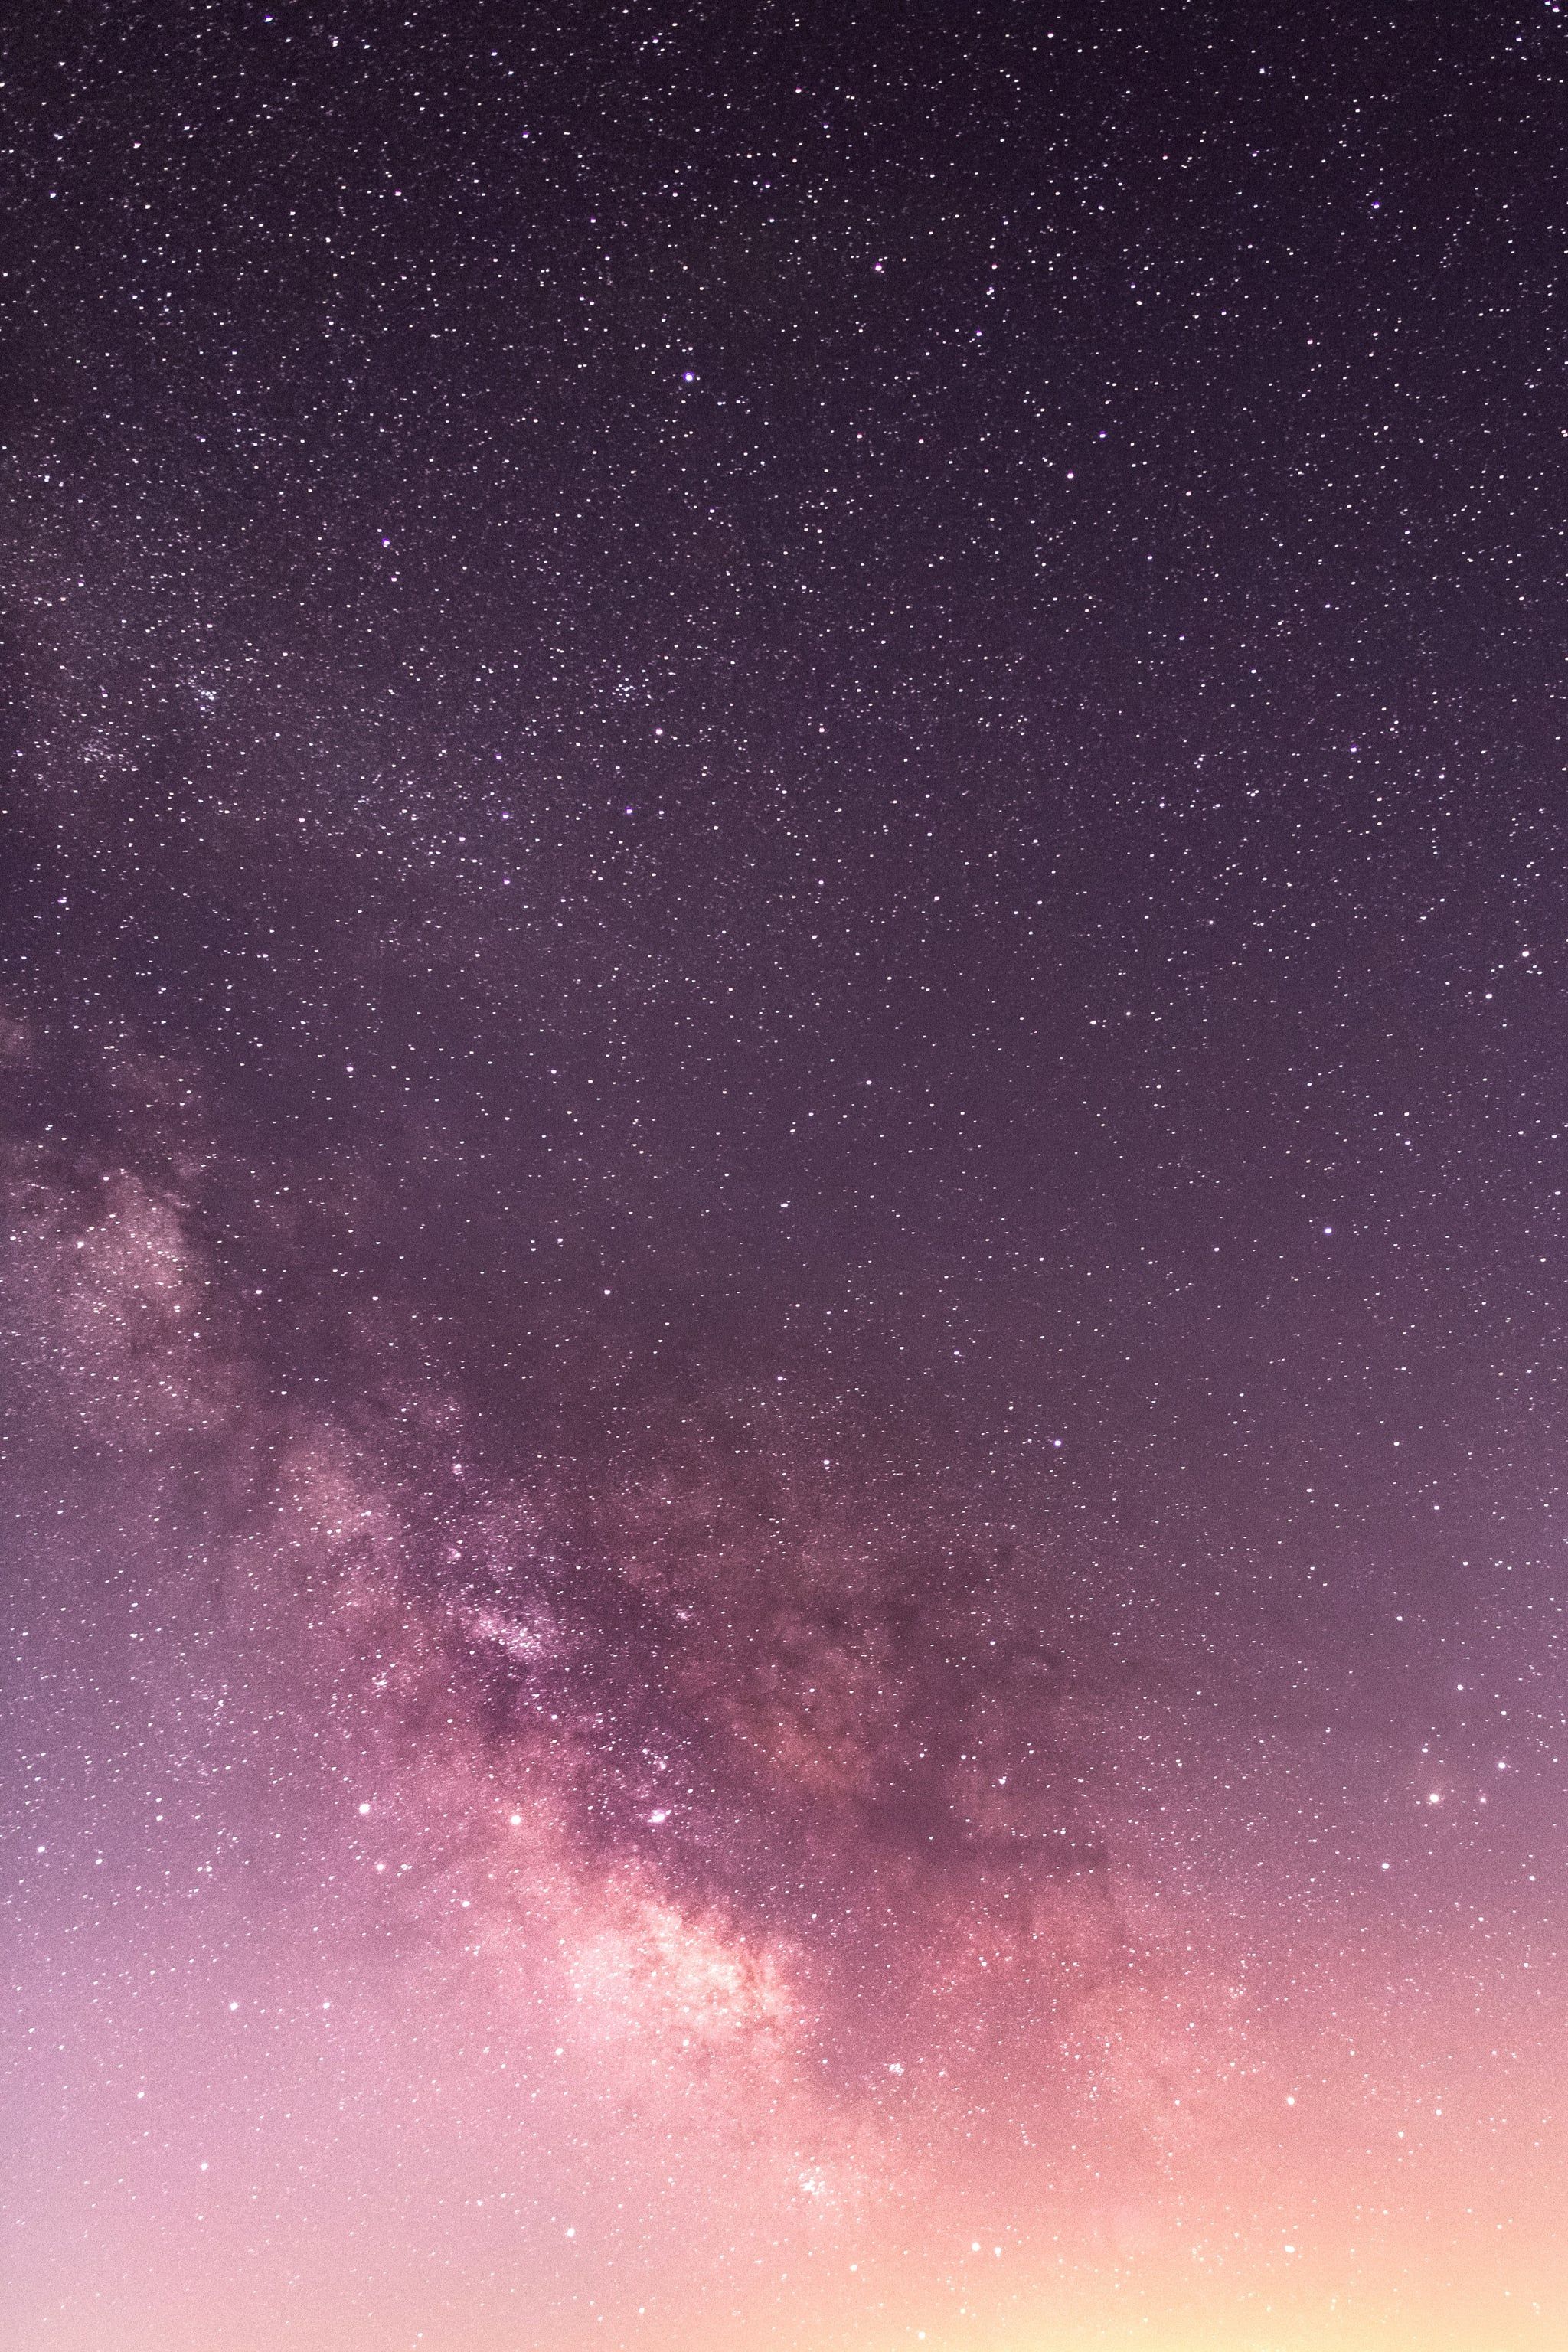 Night Sky iPhone Wallpaper. The Best iOS 14 Wallpaper Ideas That'll Make Your Phone Look Aesthetically Pleasing AF